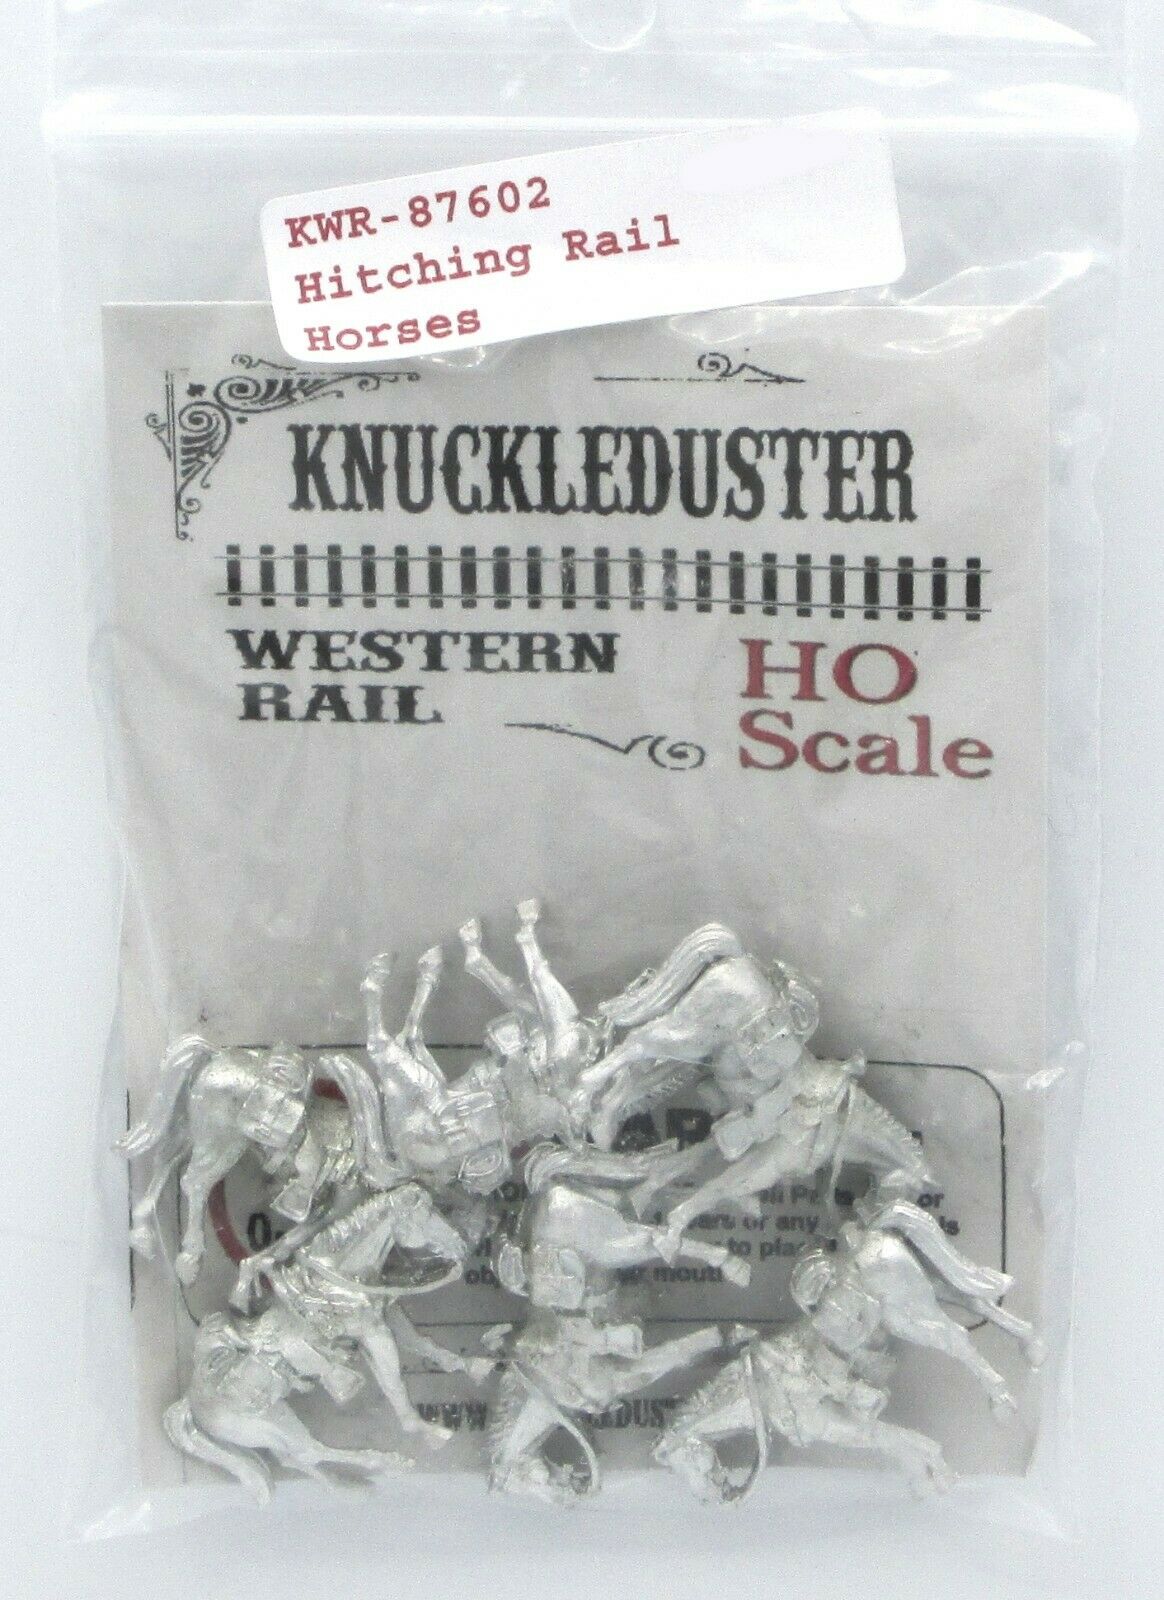 Knuckleduster Kwr-87602 Hitching Rail Horses (ho Scale) Old West Animals Mounts